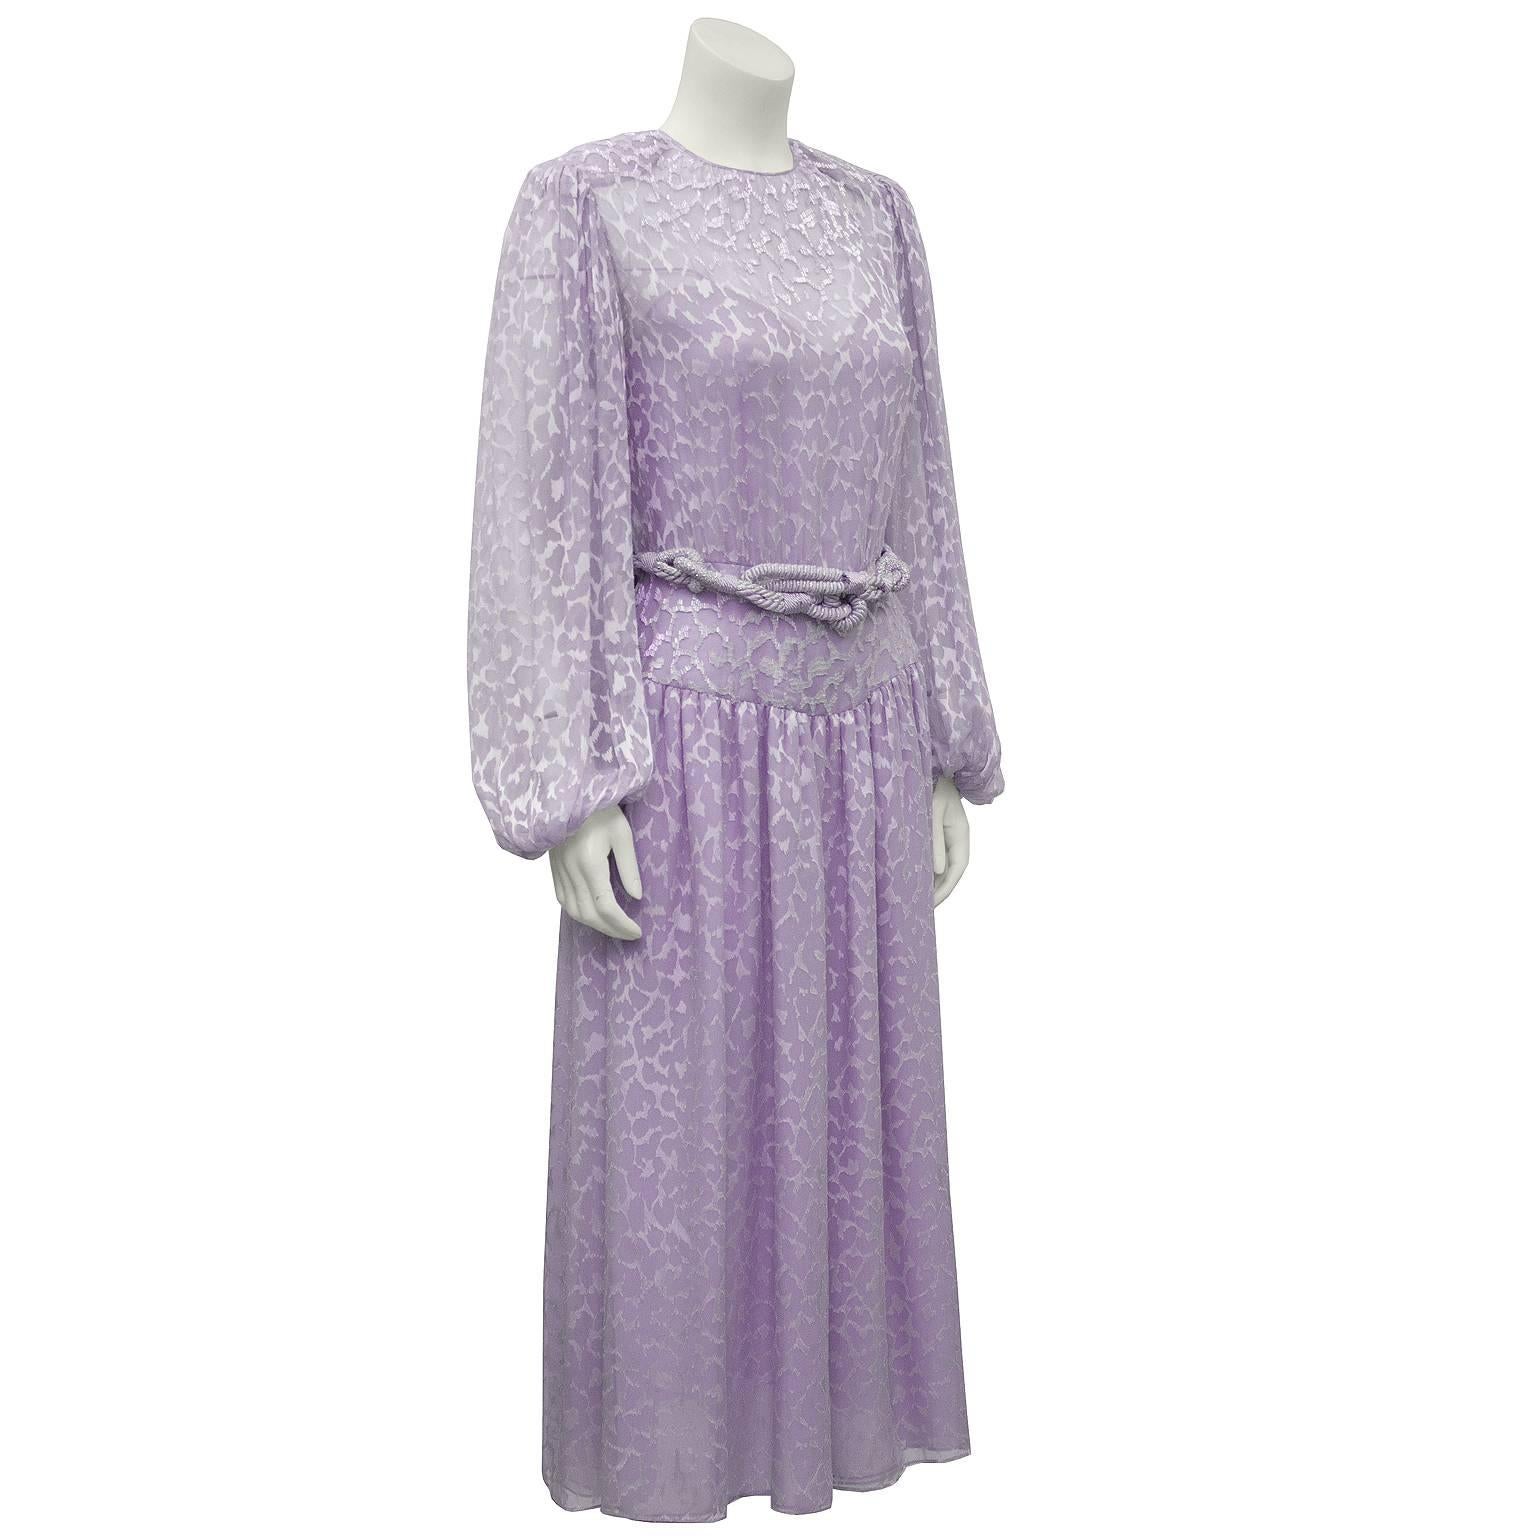 Lavender silk chiffon beaded evening dress by Oscar de la Renta. Fabric has an all over devoree leopard print with white iridescent beading at the neckline and along the waistband. Full sleeves with elasticized cuffs. Attached lavender slip and